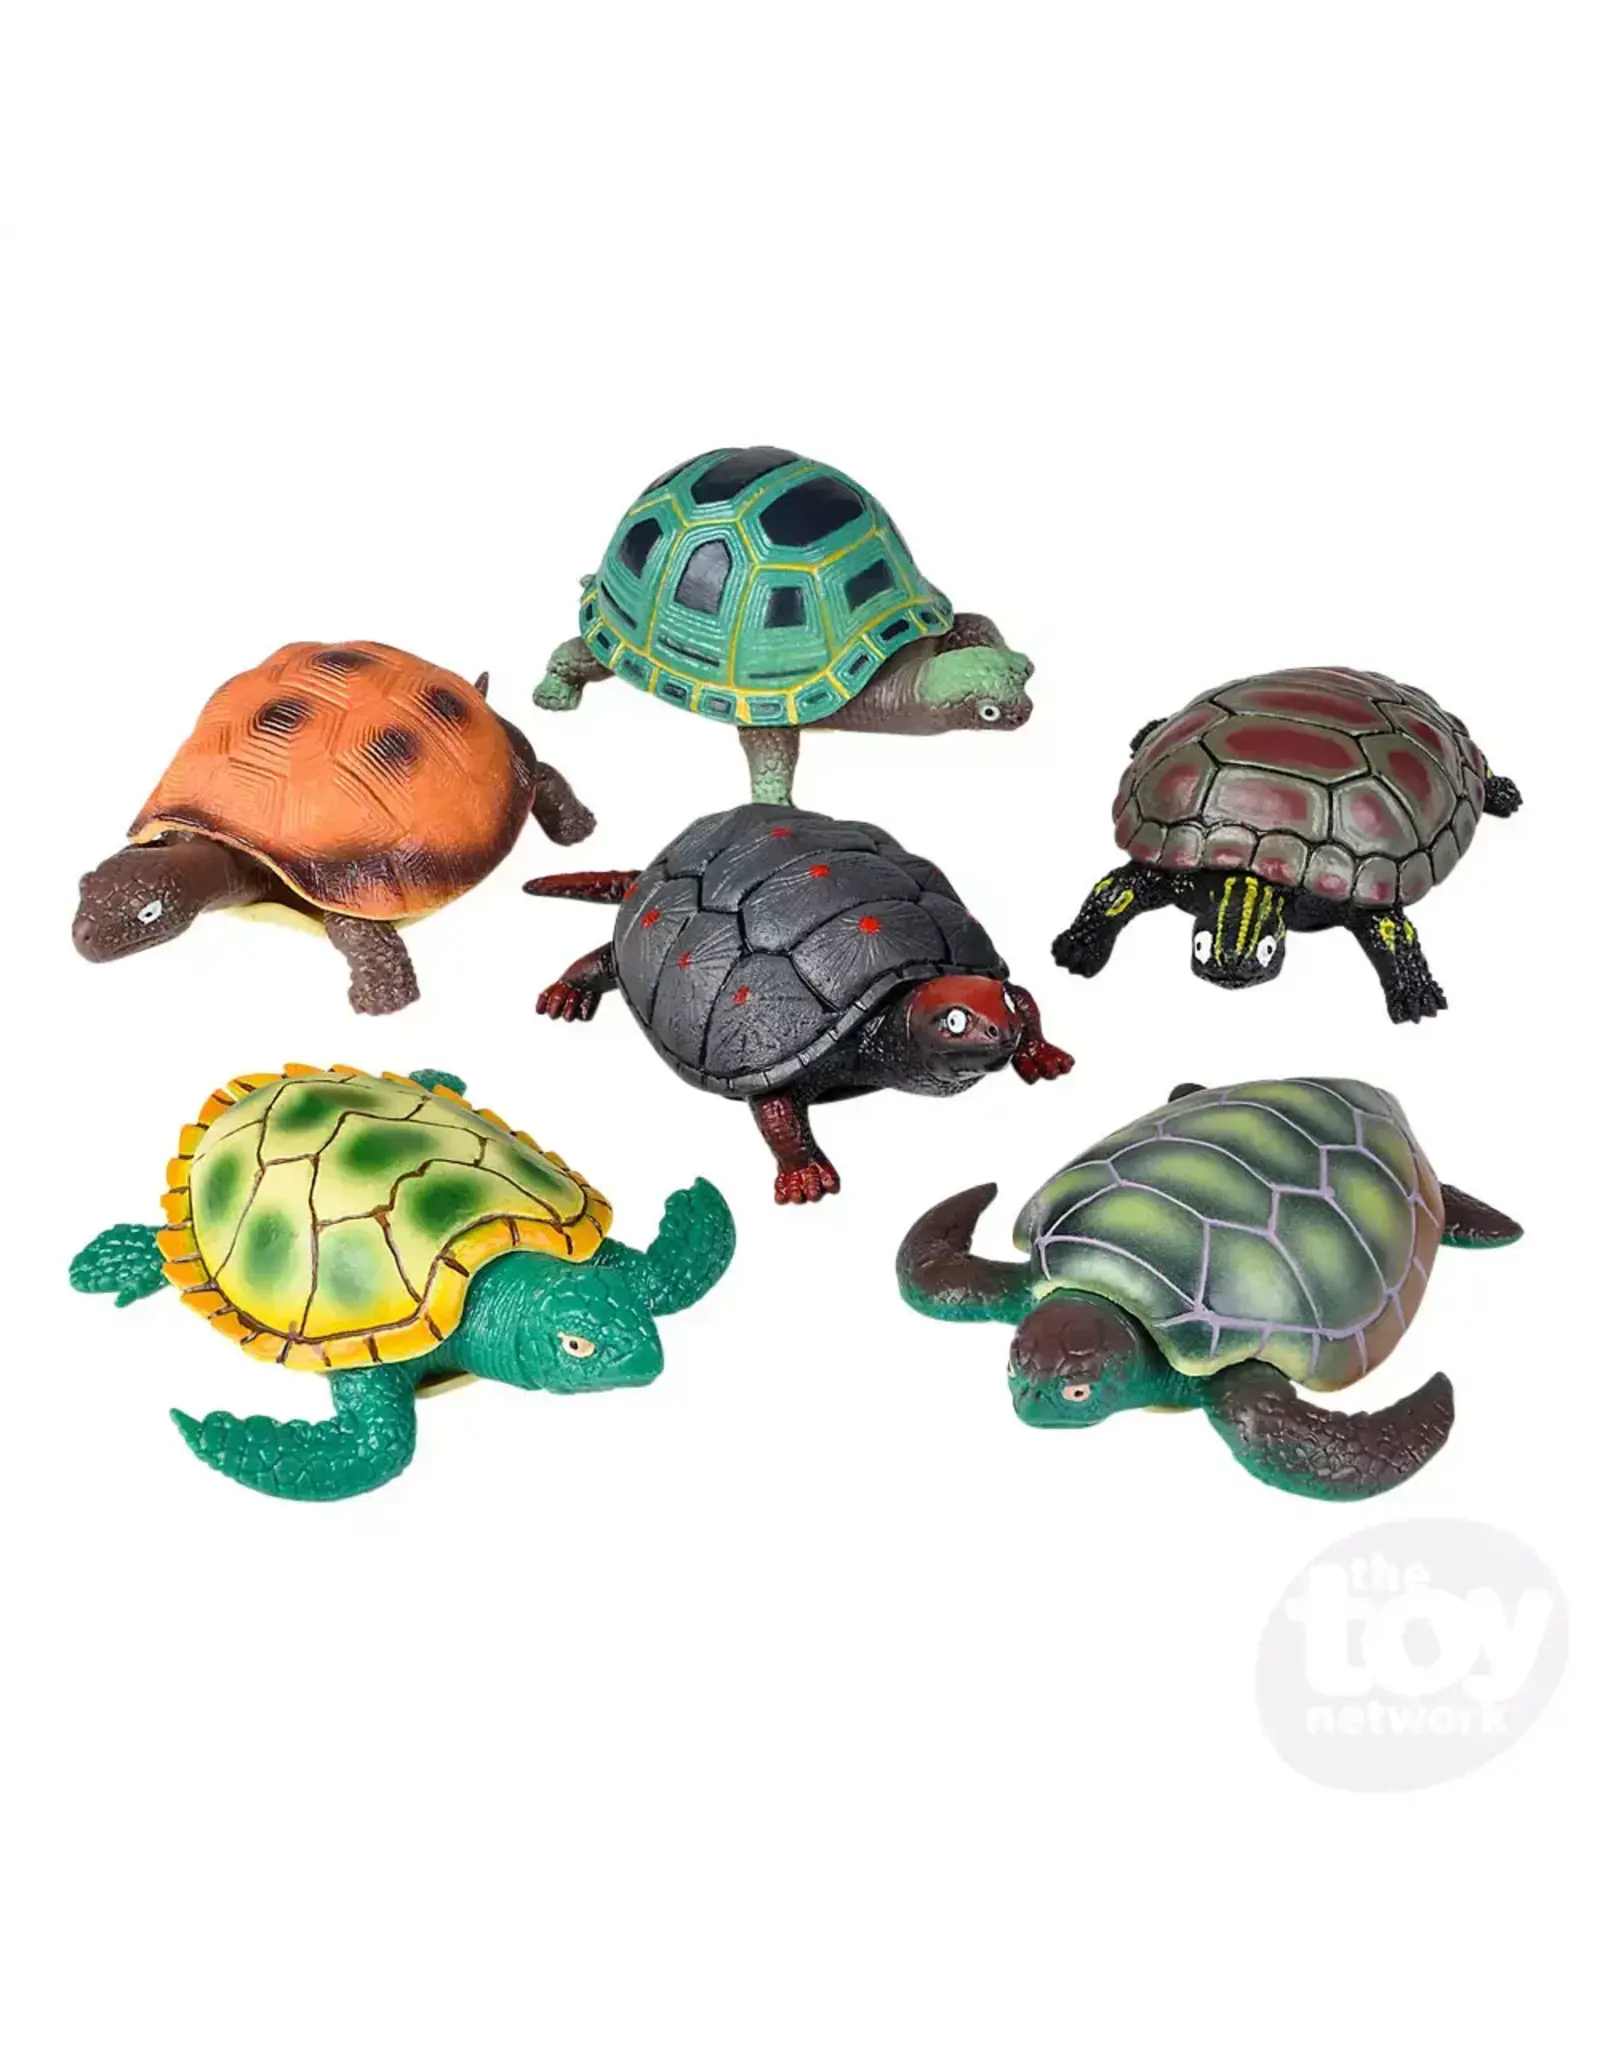 4.5" Stretch Turtle - Assorted Colors